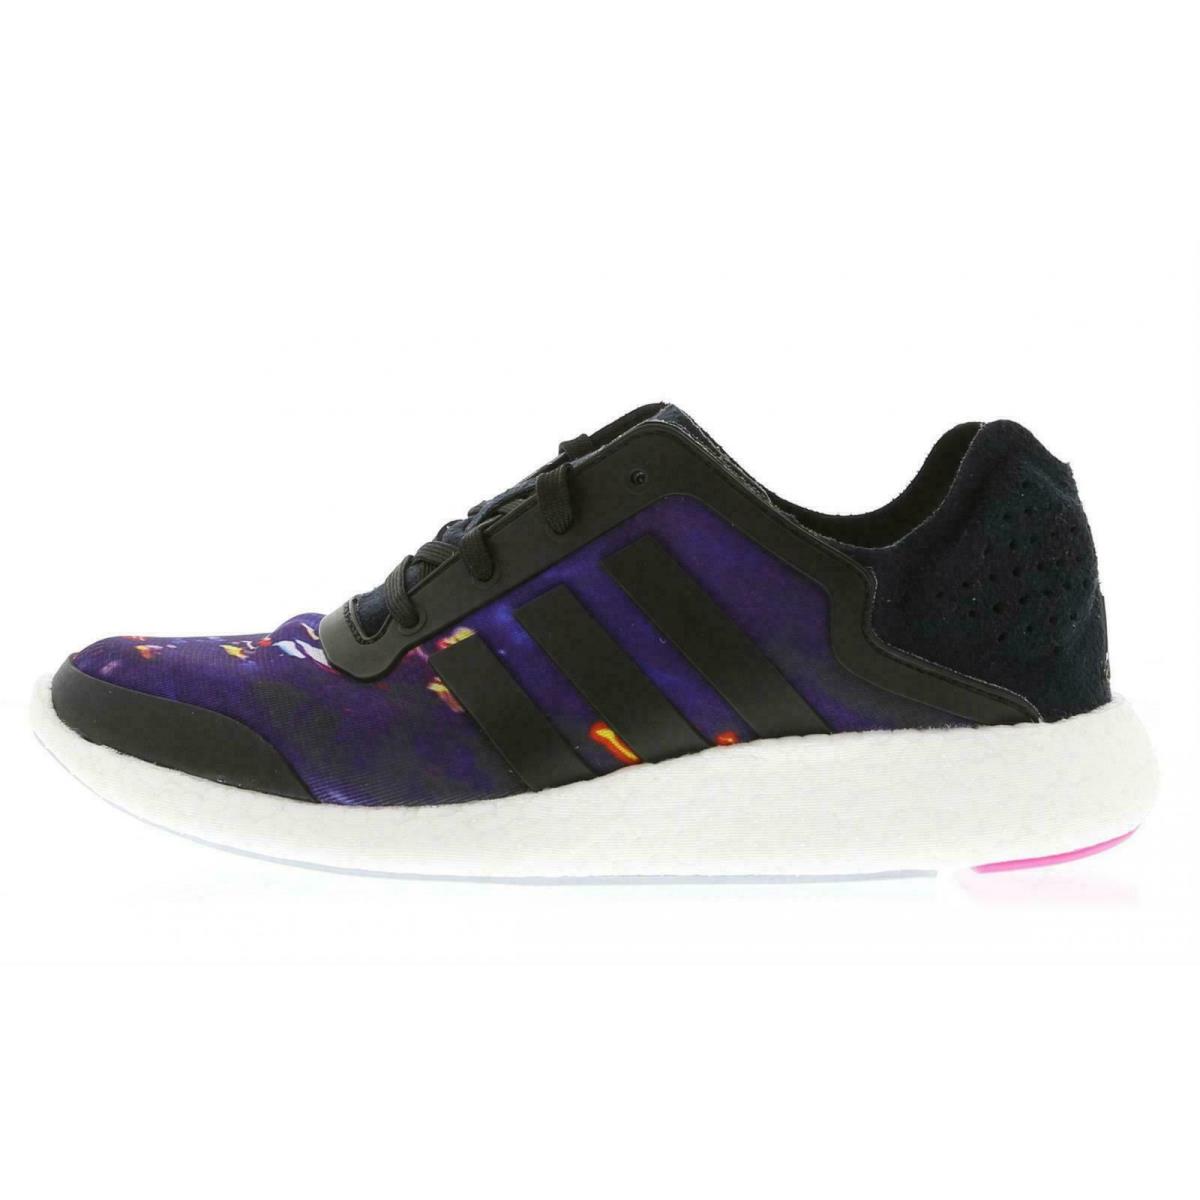 Adidas Pureboost Womens Running Trainers M21350 Sneakers Shoes Size : 10 - FTWWHT/CBLACK/CLEGRE